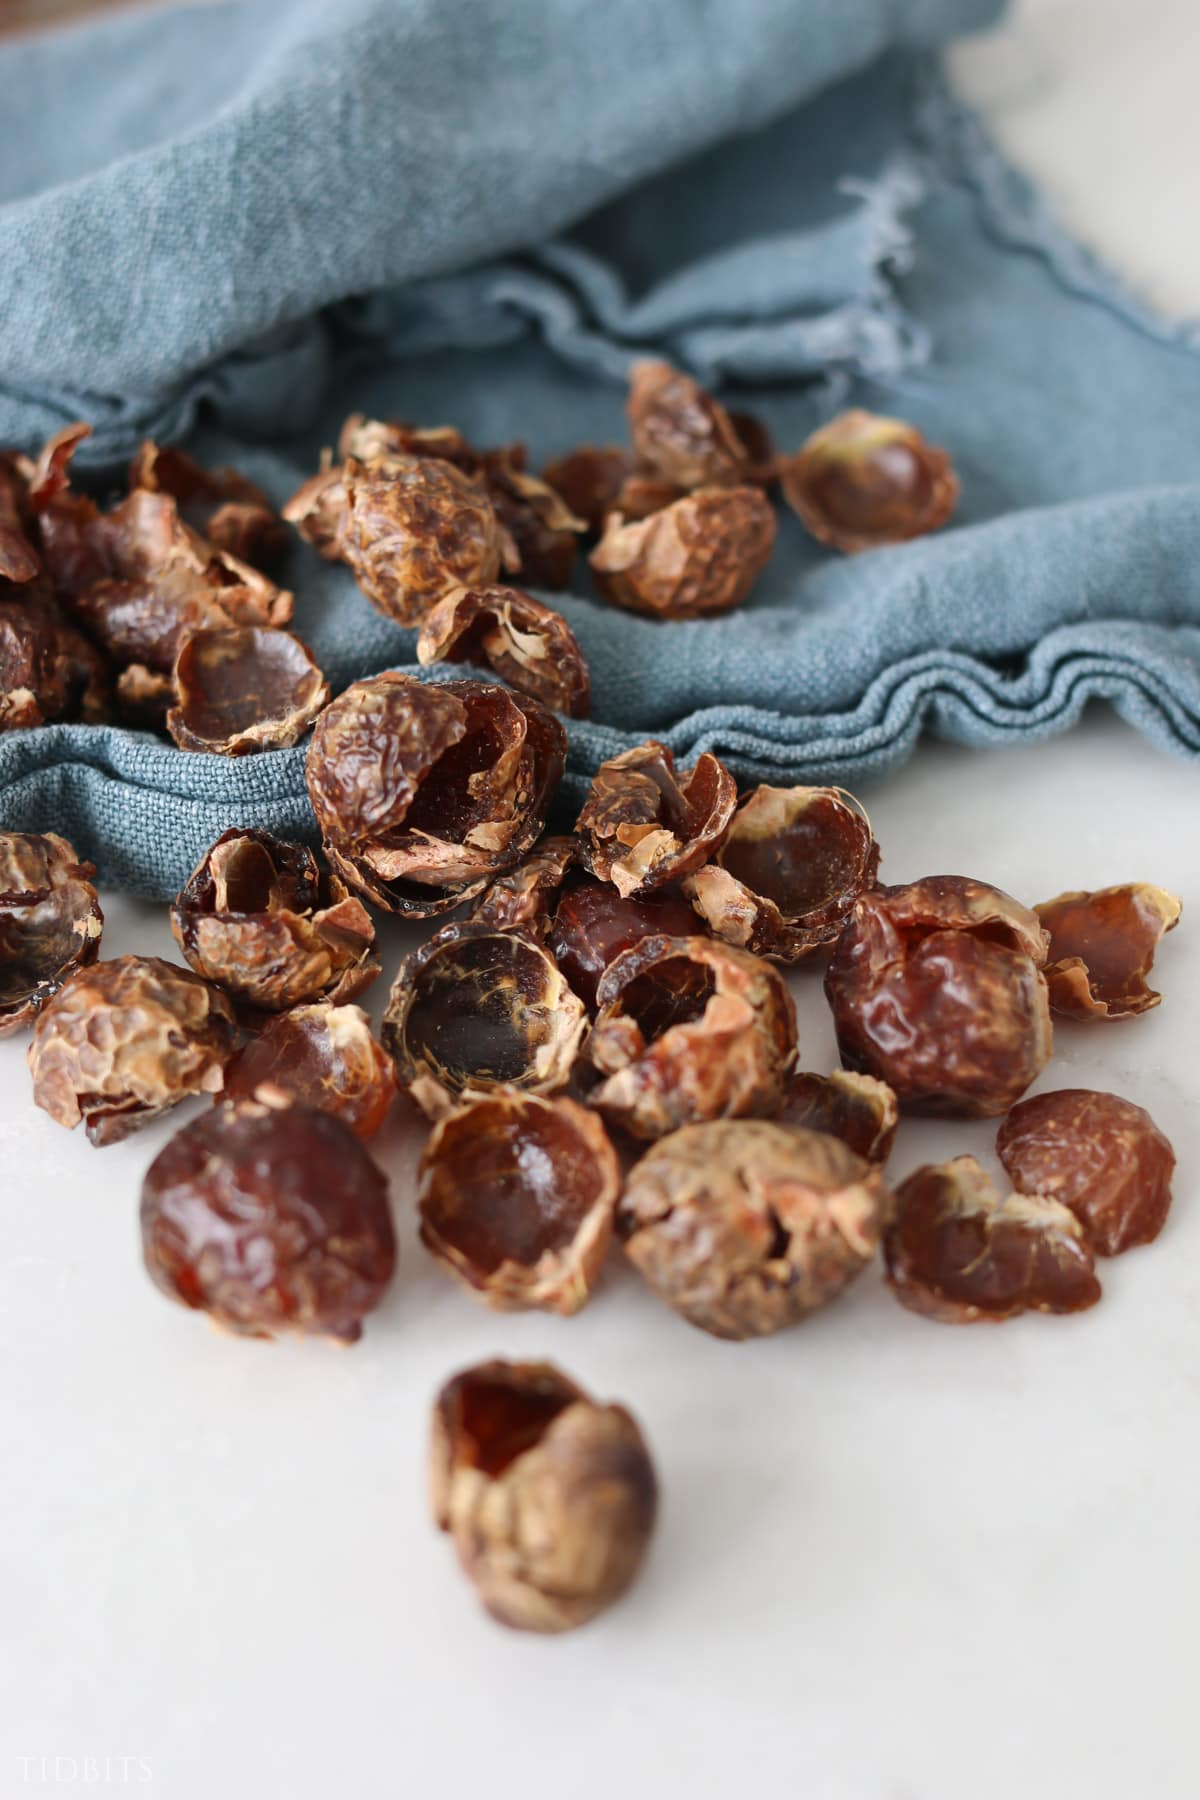 what are soap nuts?